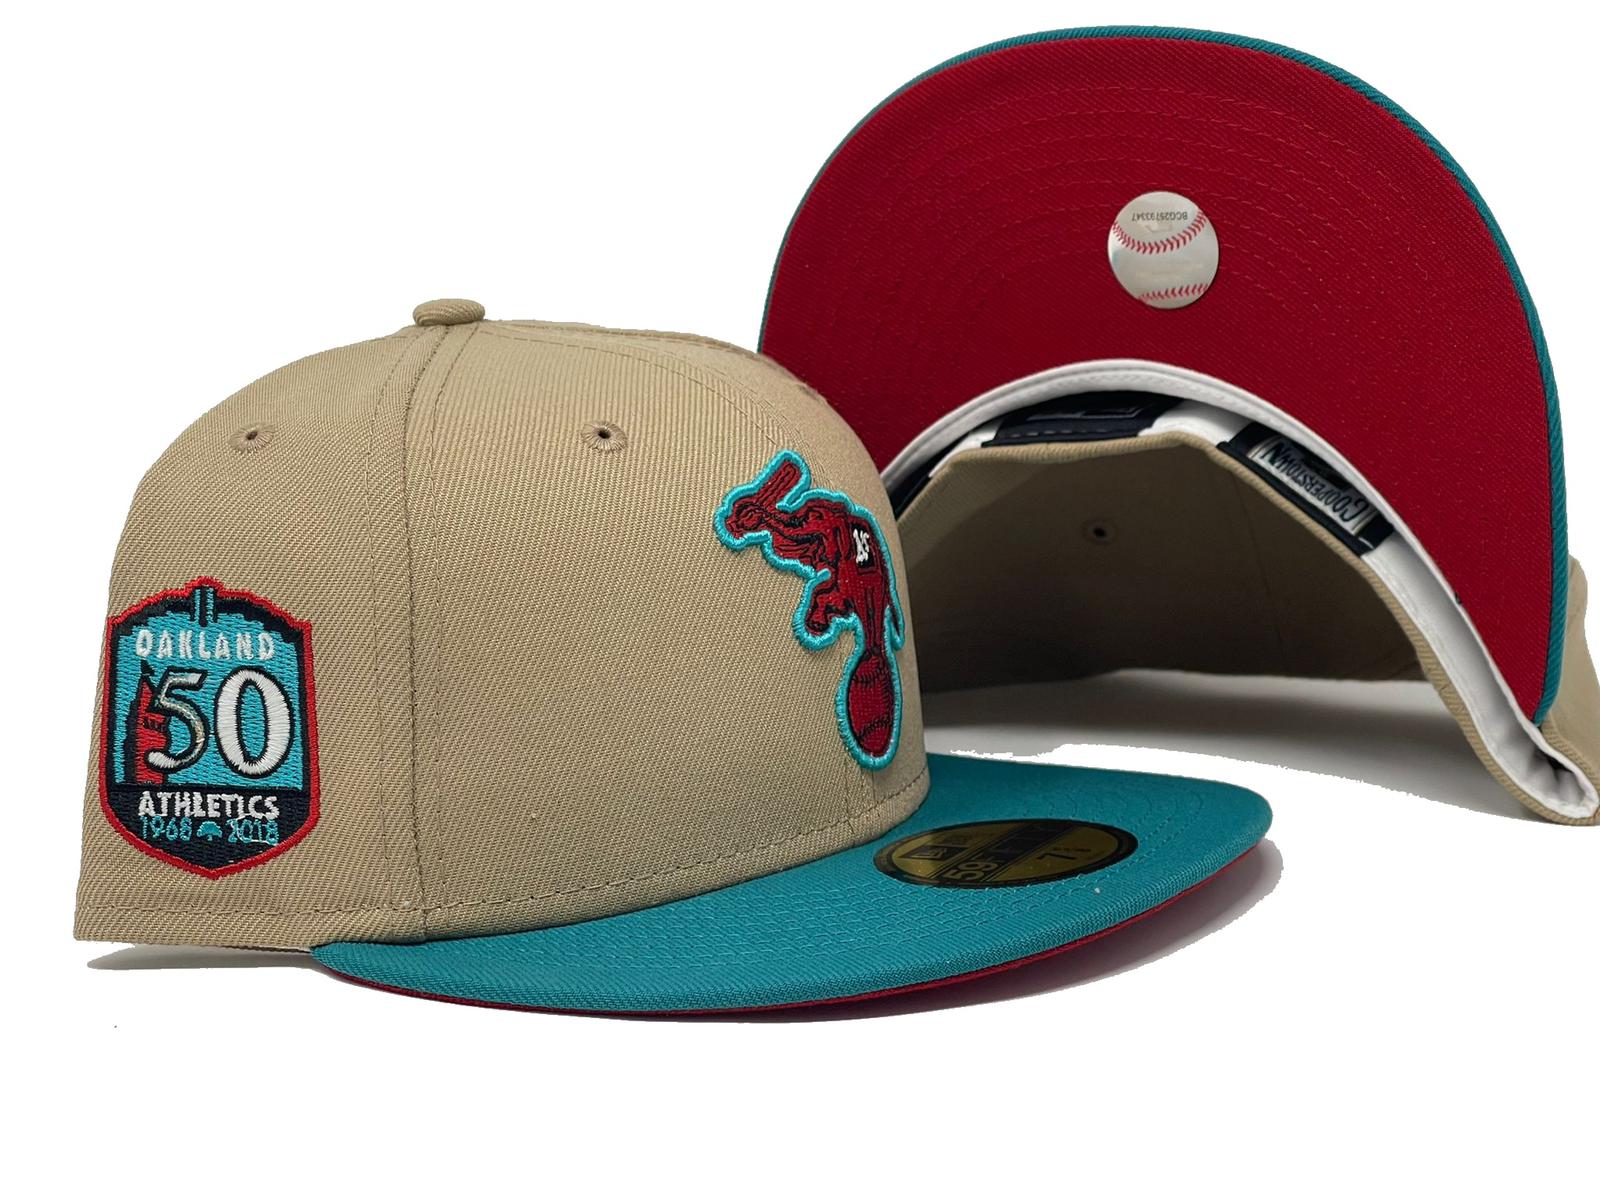 New Era Jacksonville Jumbo Shrimp Red Edition 59Fifty Fitted Cap